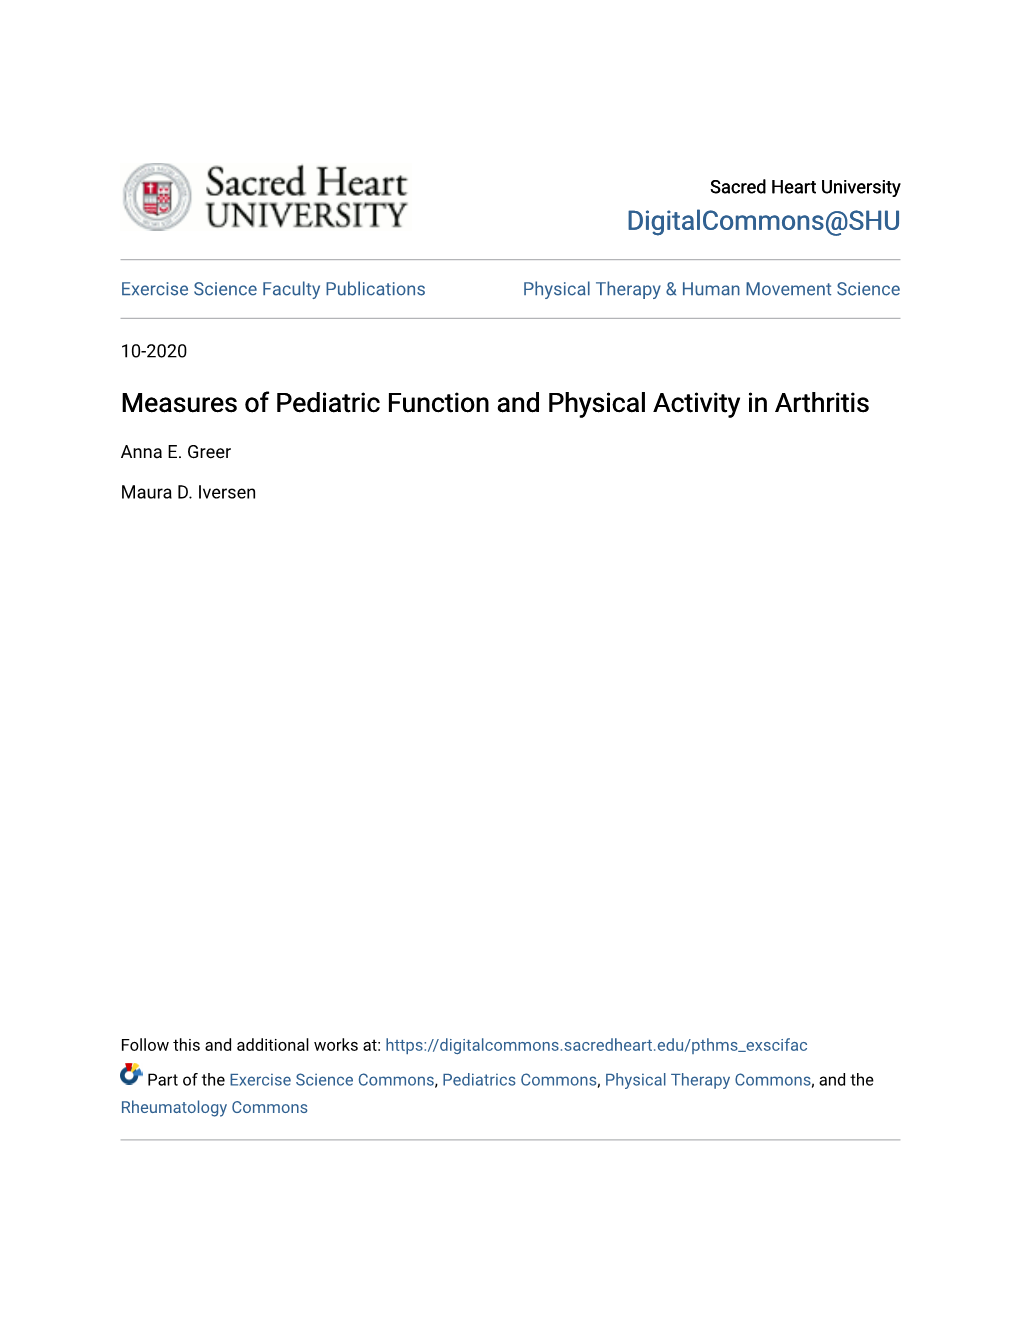 Measures of Pediatric Function and Physical Activity in Arthritis